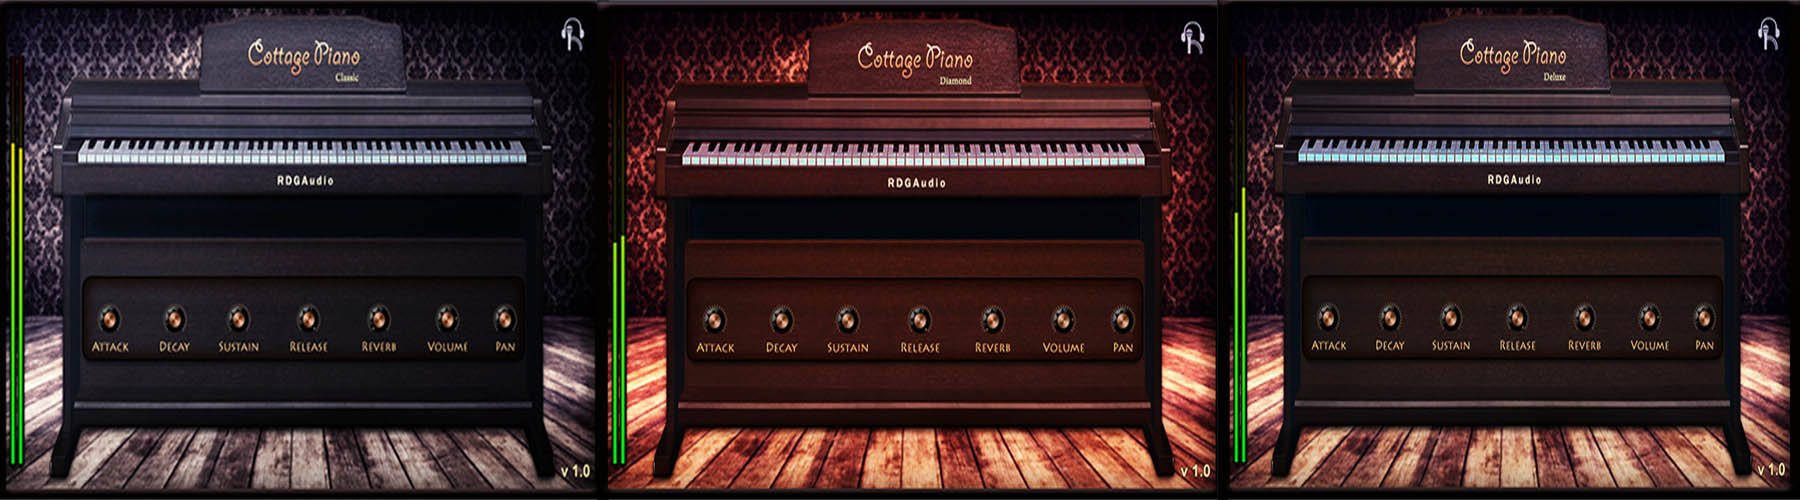 Cottage Piano RDGAudio 3 types models